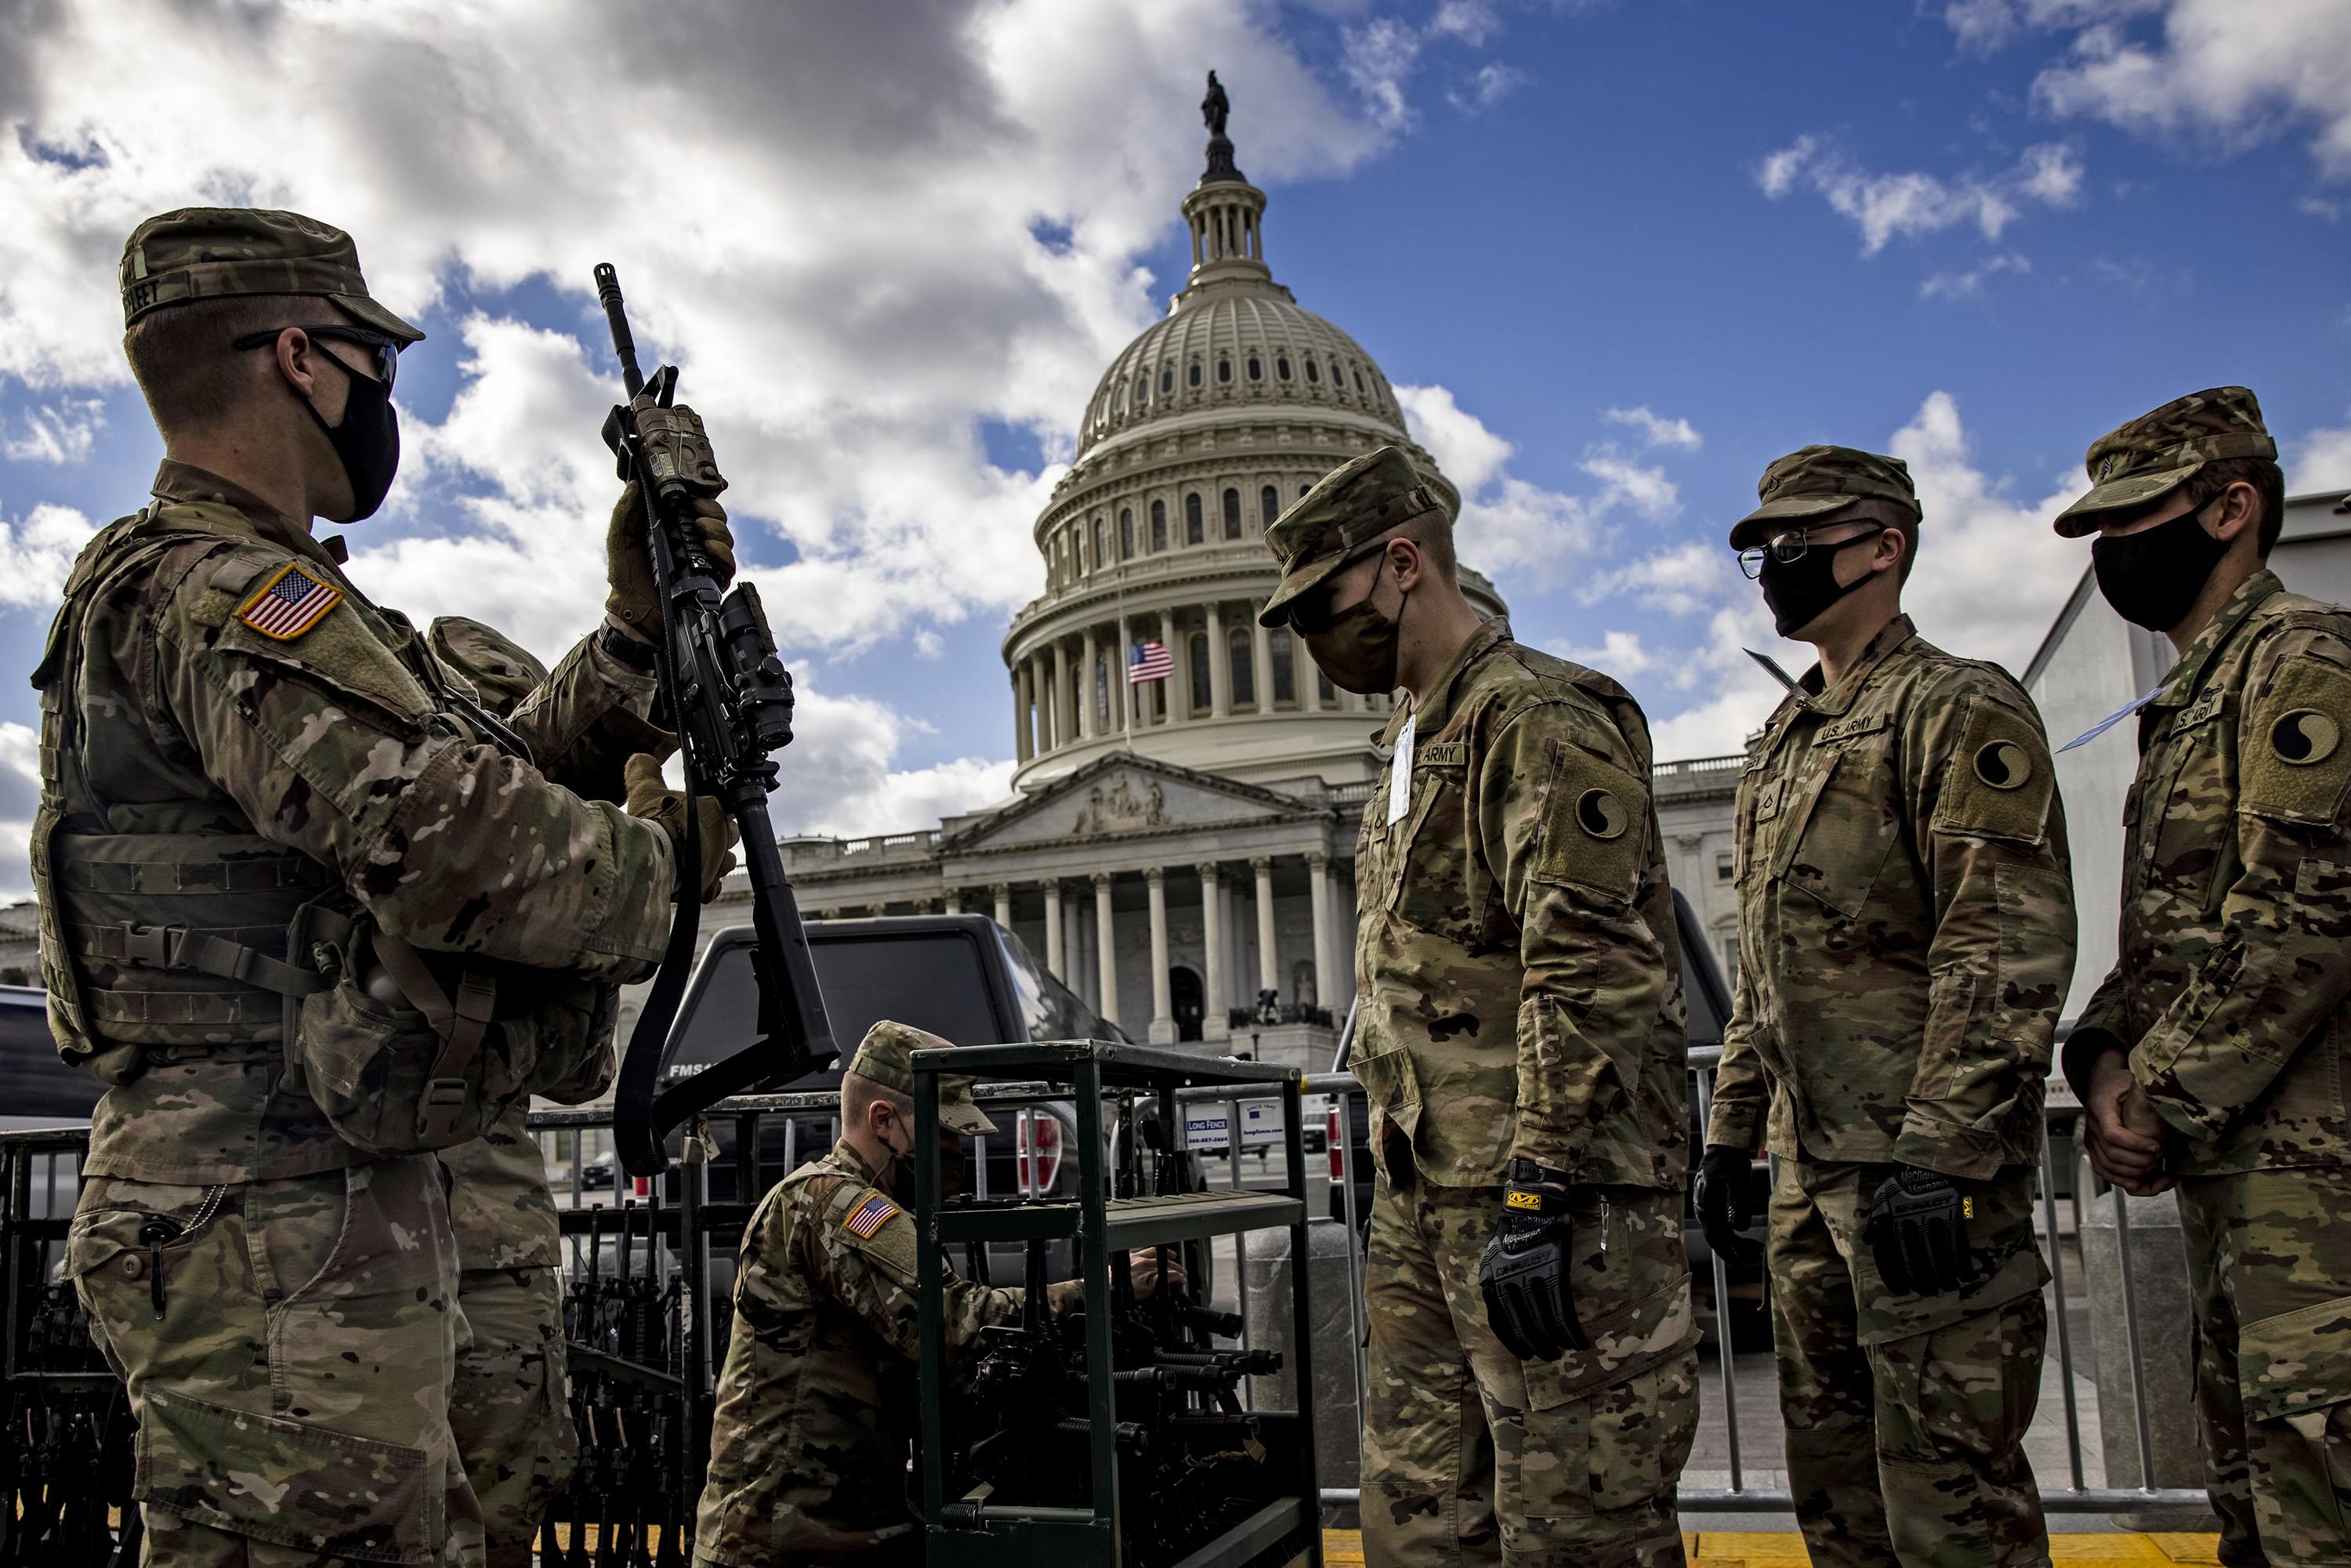 National Guard troops are issued rifles and ammunition outside the US Capitol building in January last year. Photo: Samuel Corum/Getty Images/TNS